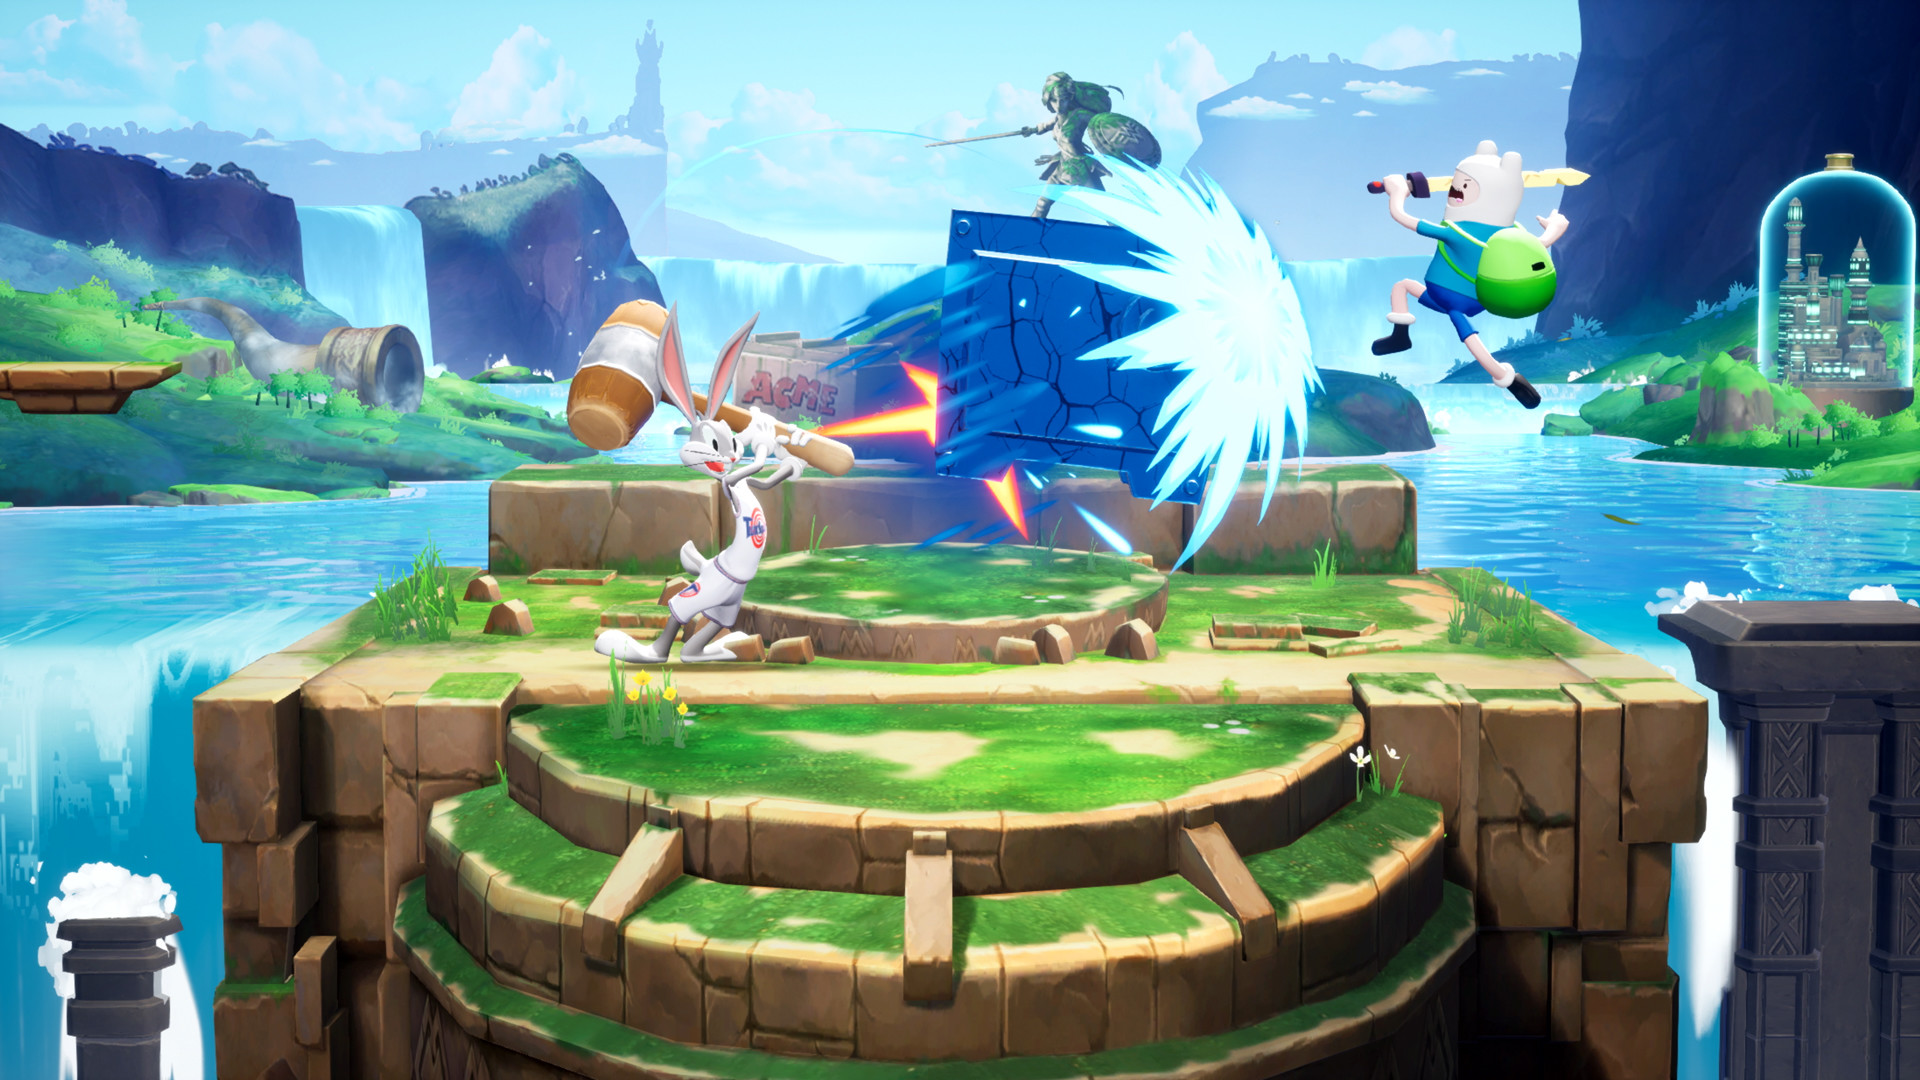 WB is launching a Super Smash Bros. style game with characters